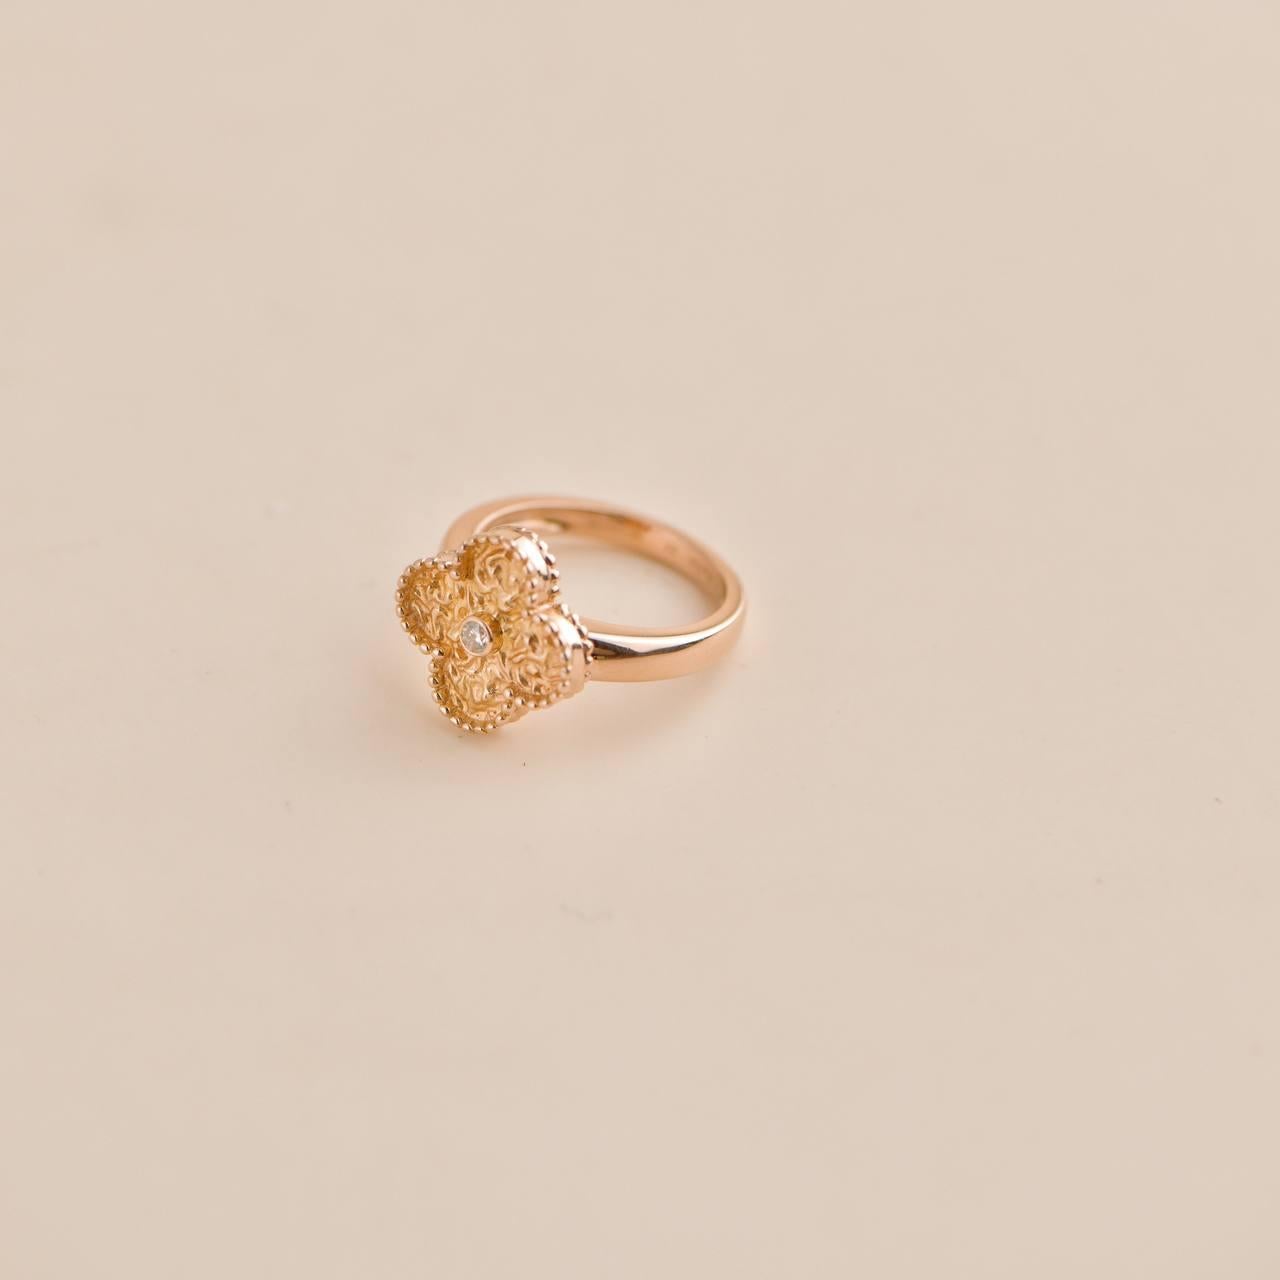 Van Cleef & Arpels Vintage Alhambra Rose Gold Diamond Hammered Ring Size 53 In Excellent Condition For Sale In Banbury, GB